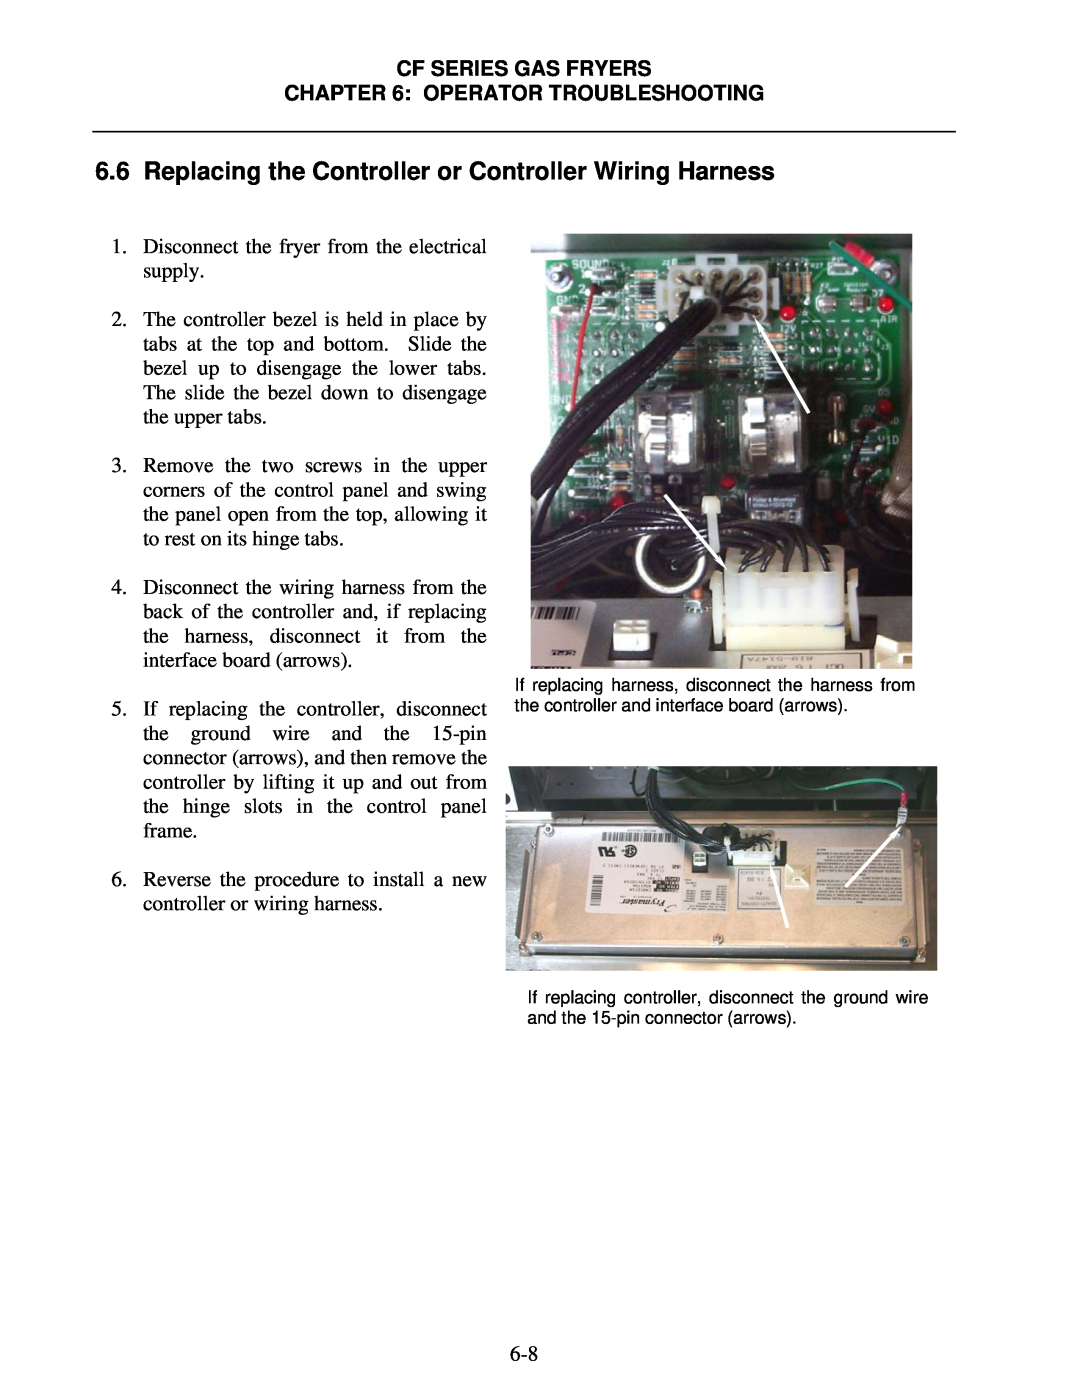 Frymaster CF Series operation manual Replacing the Controller or Controller Wiring Harness 